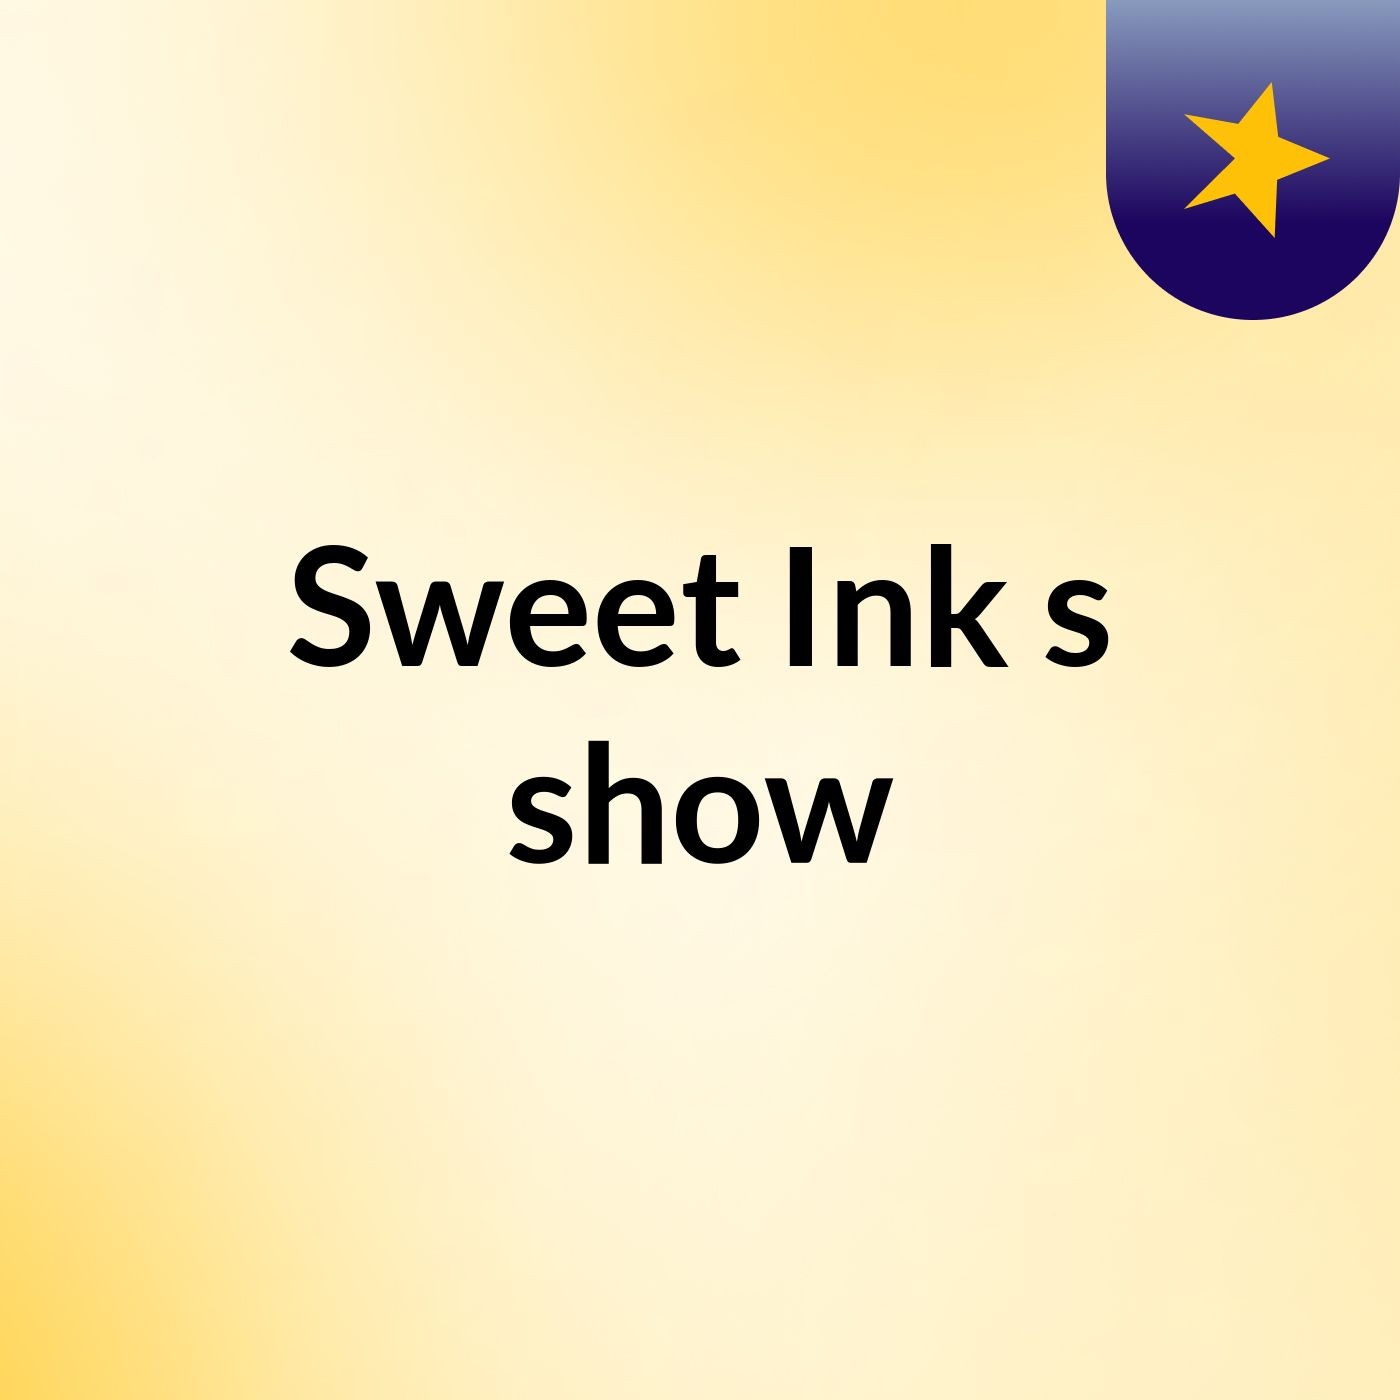 Sweet Ink's show